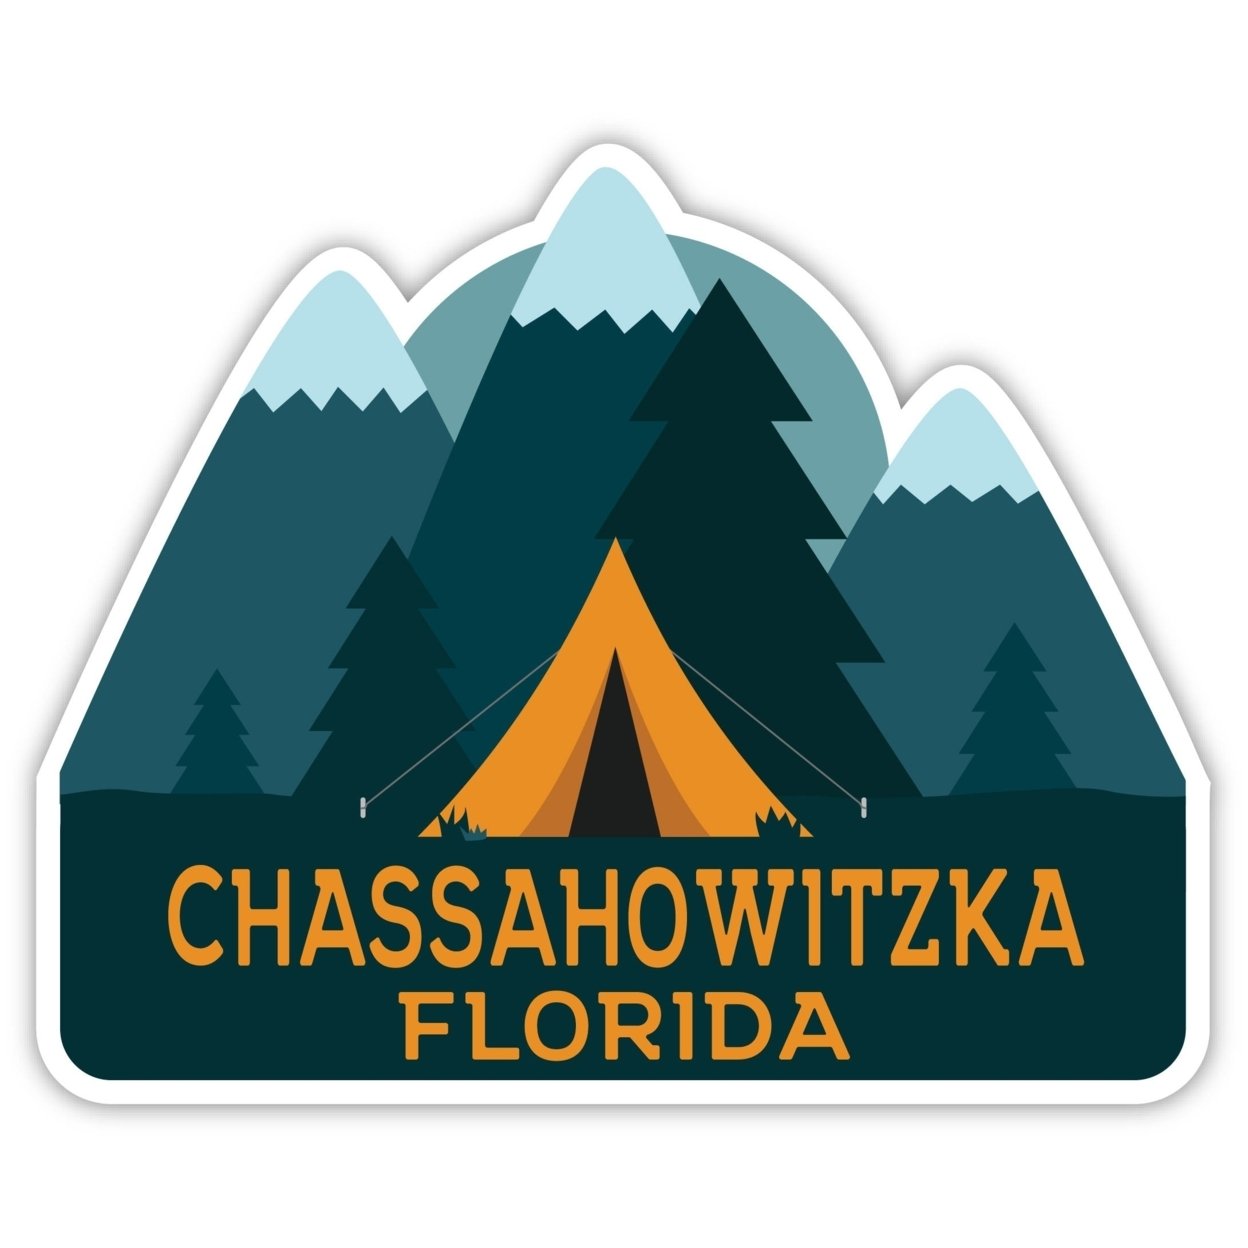 Chassahowitzka Florida Souvenir Decorative Stickers (Choose Theme And Size) - 4-Pack, 6-Inch, Tent